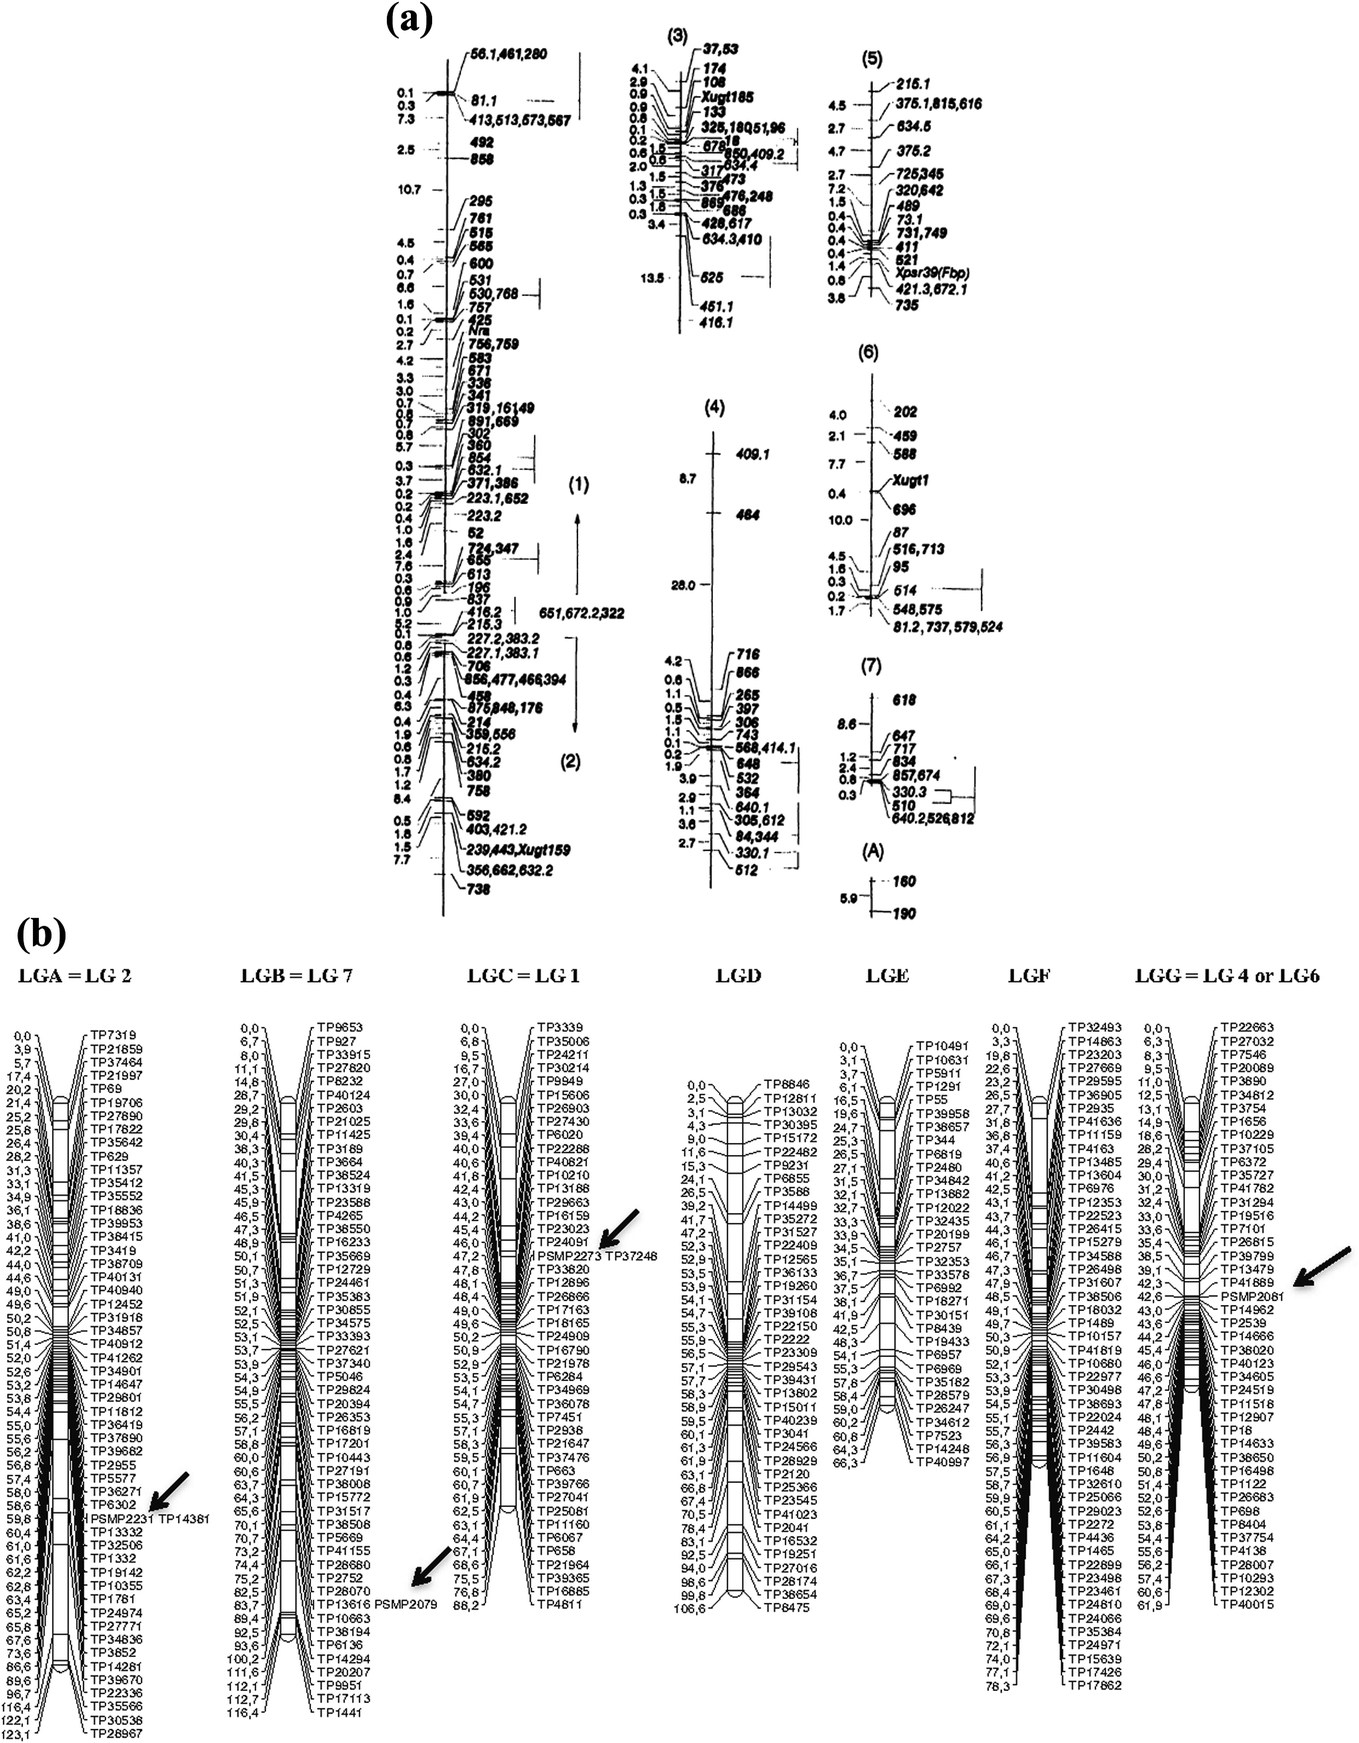 Genomic Designing of Pearl Millet: A Resilient Crop for Arid and ...